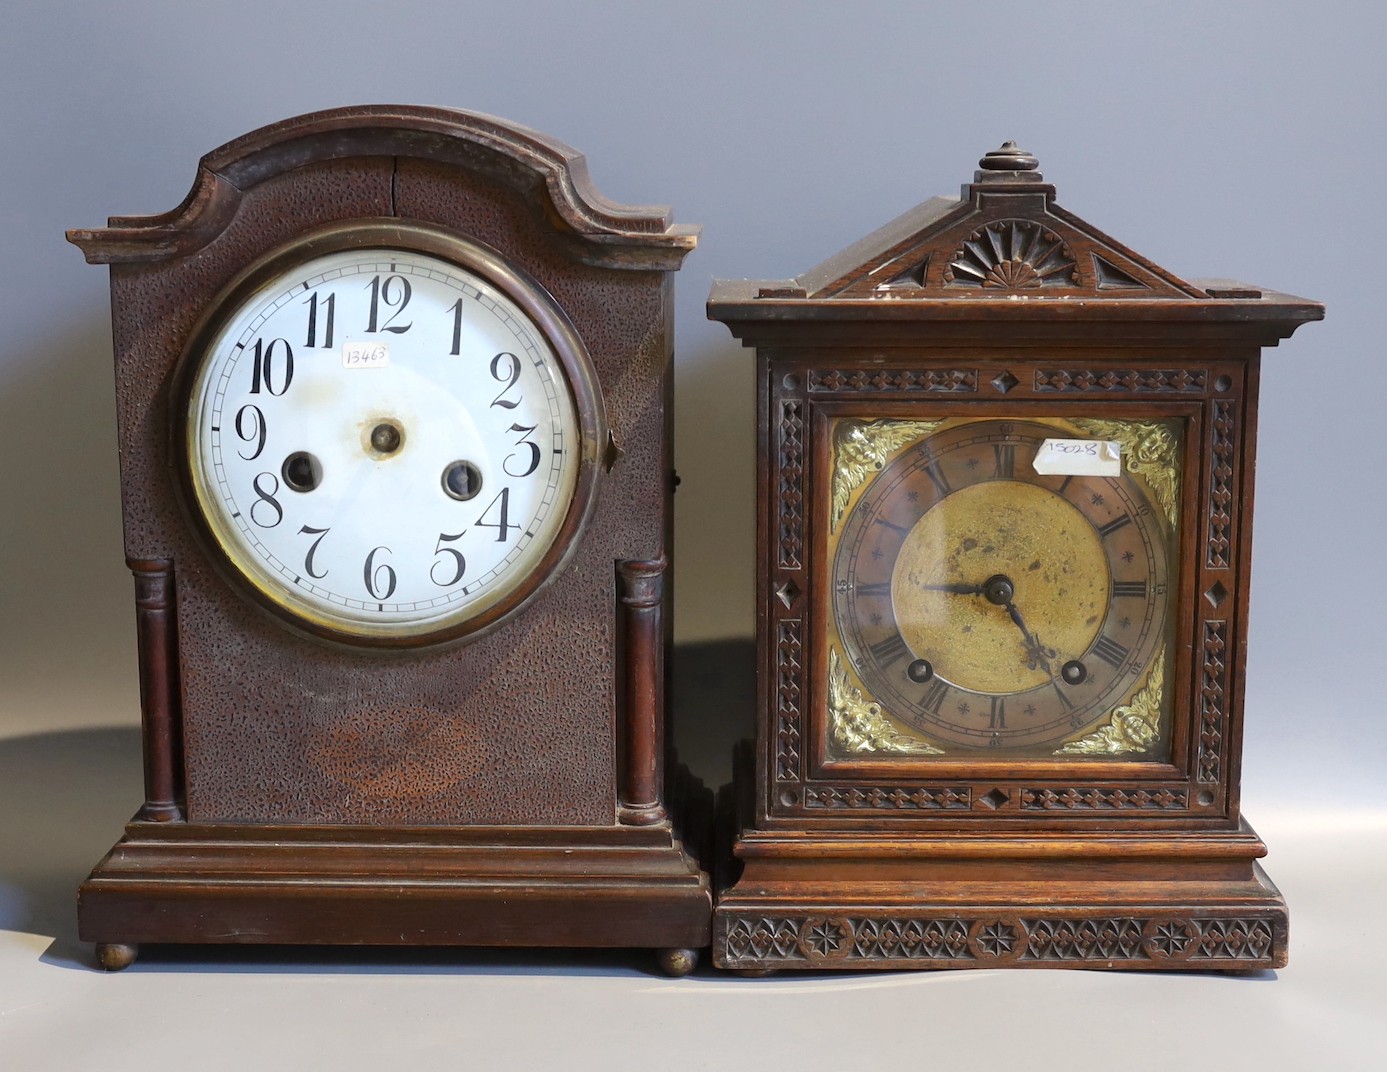 Six Victorian and later mantel clocks and timepieces, tallest 42cm